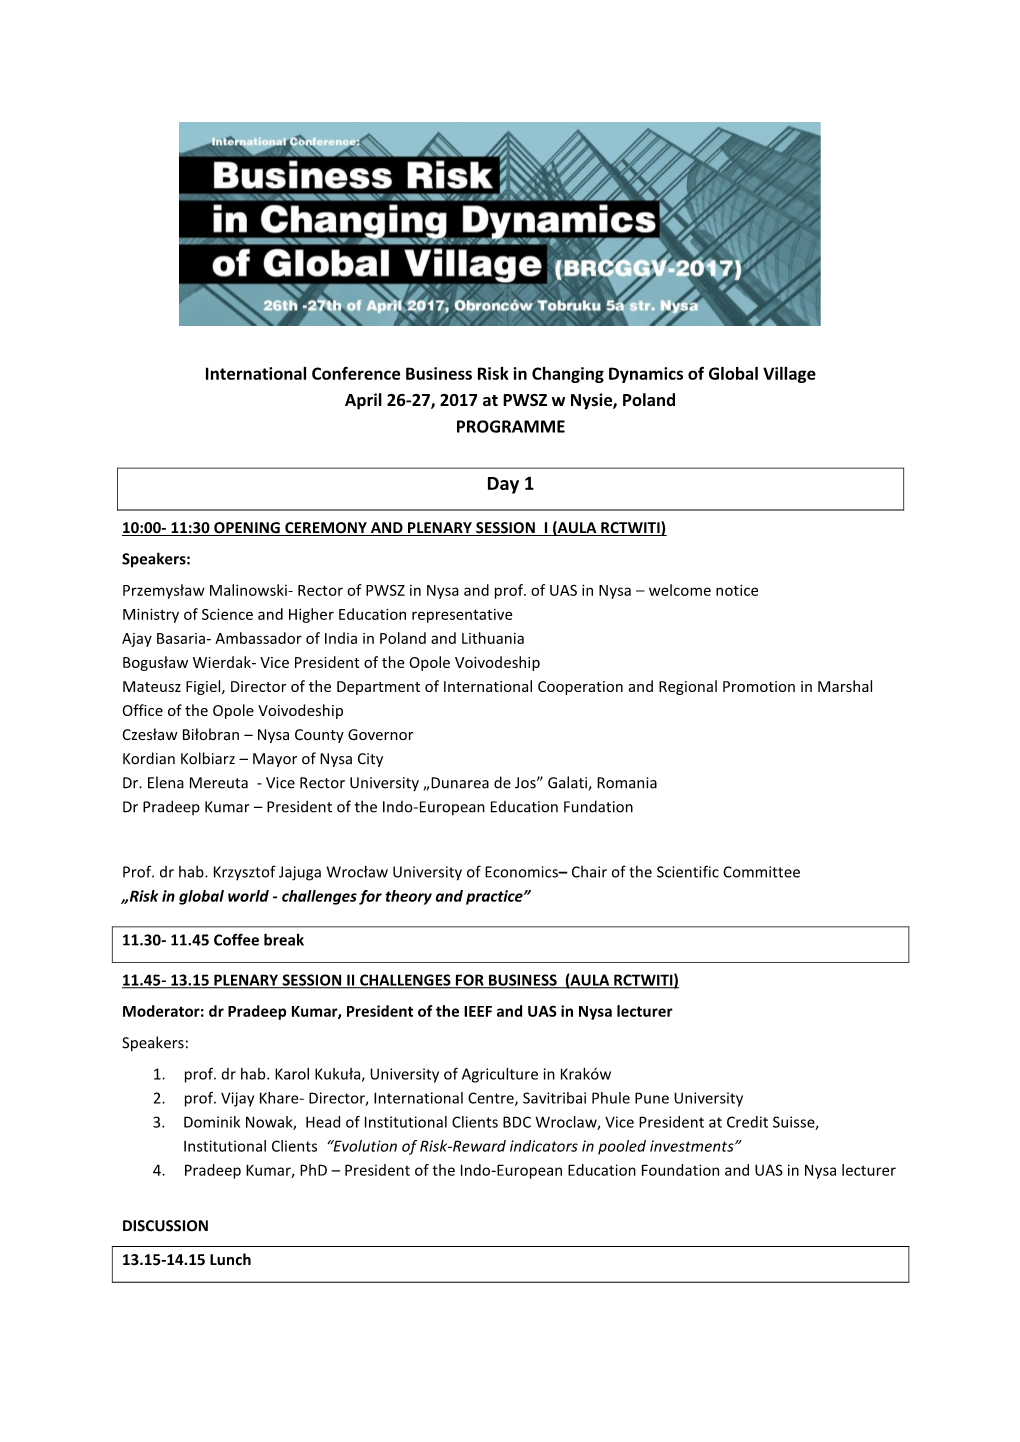 International Conference Business Risk in Changing Dynamics of Global Village April 26-27, 2017 at PWSZ W Nysie, Poland PROGRAMME